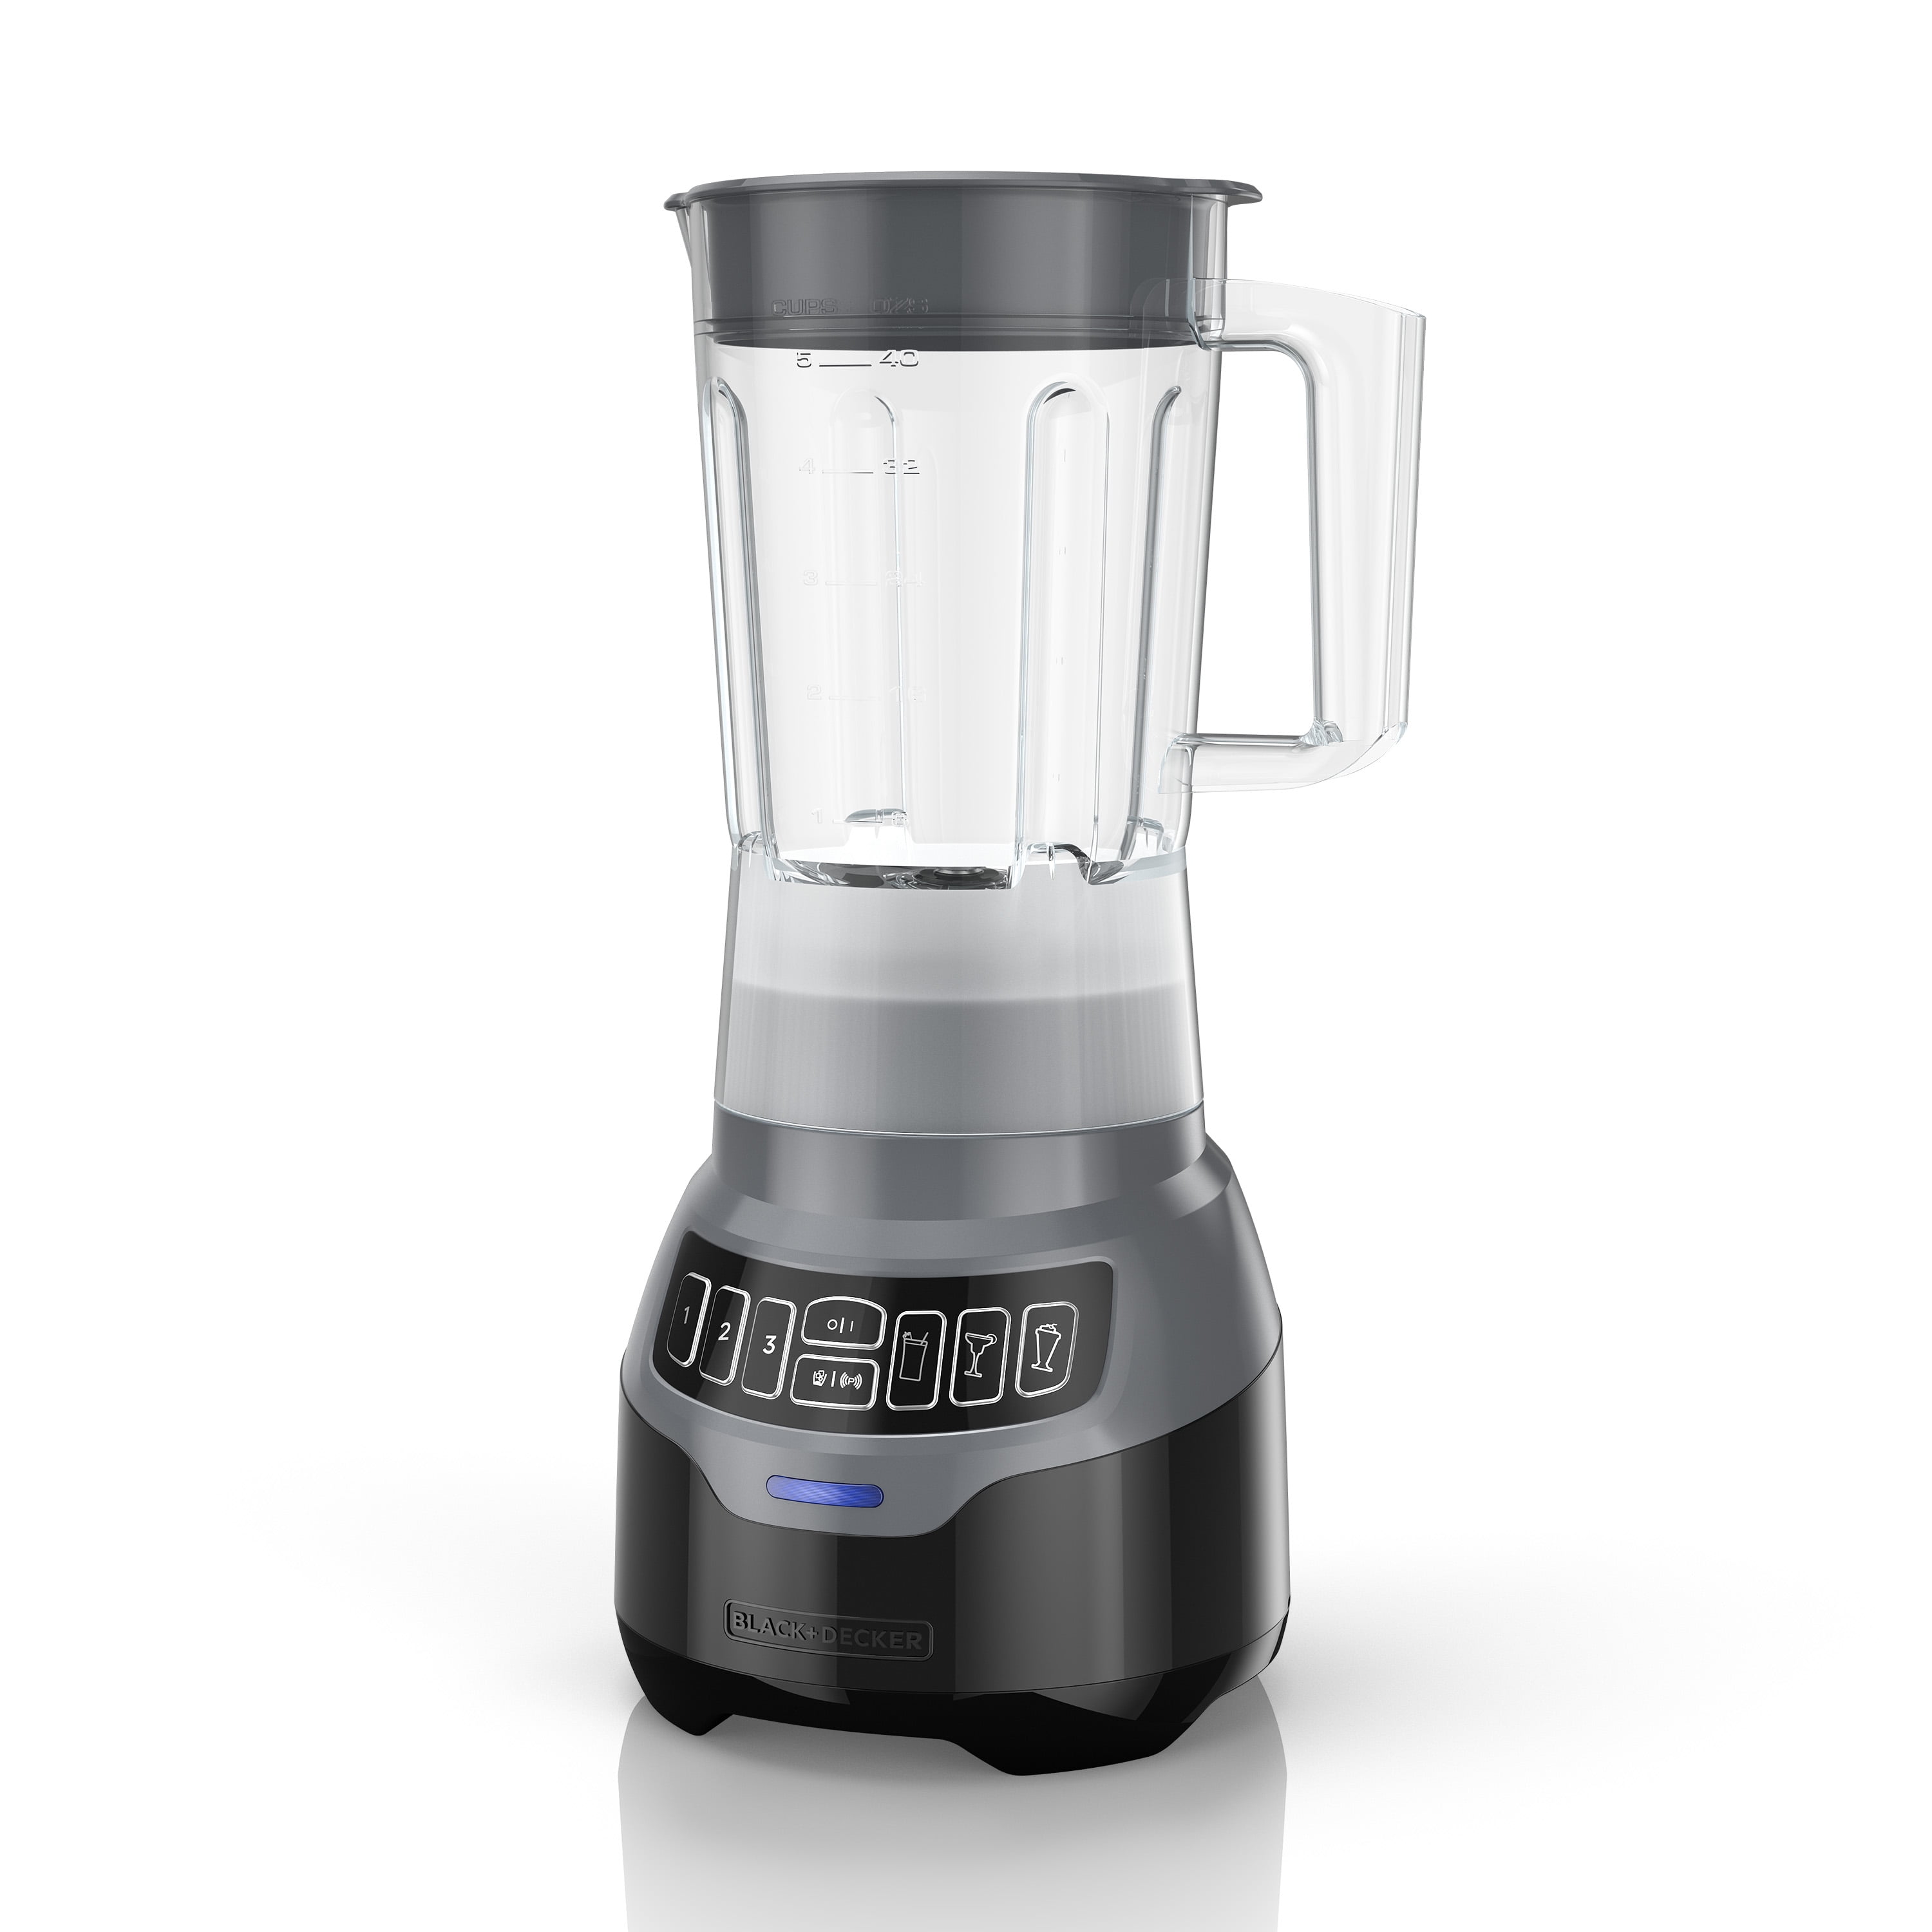 Quiet Blender with Cyclone® Glass Jar